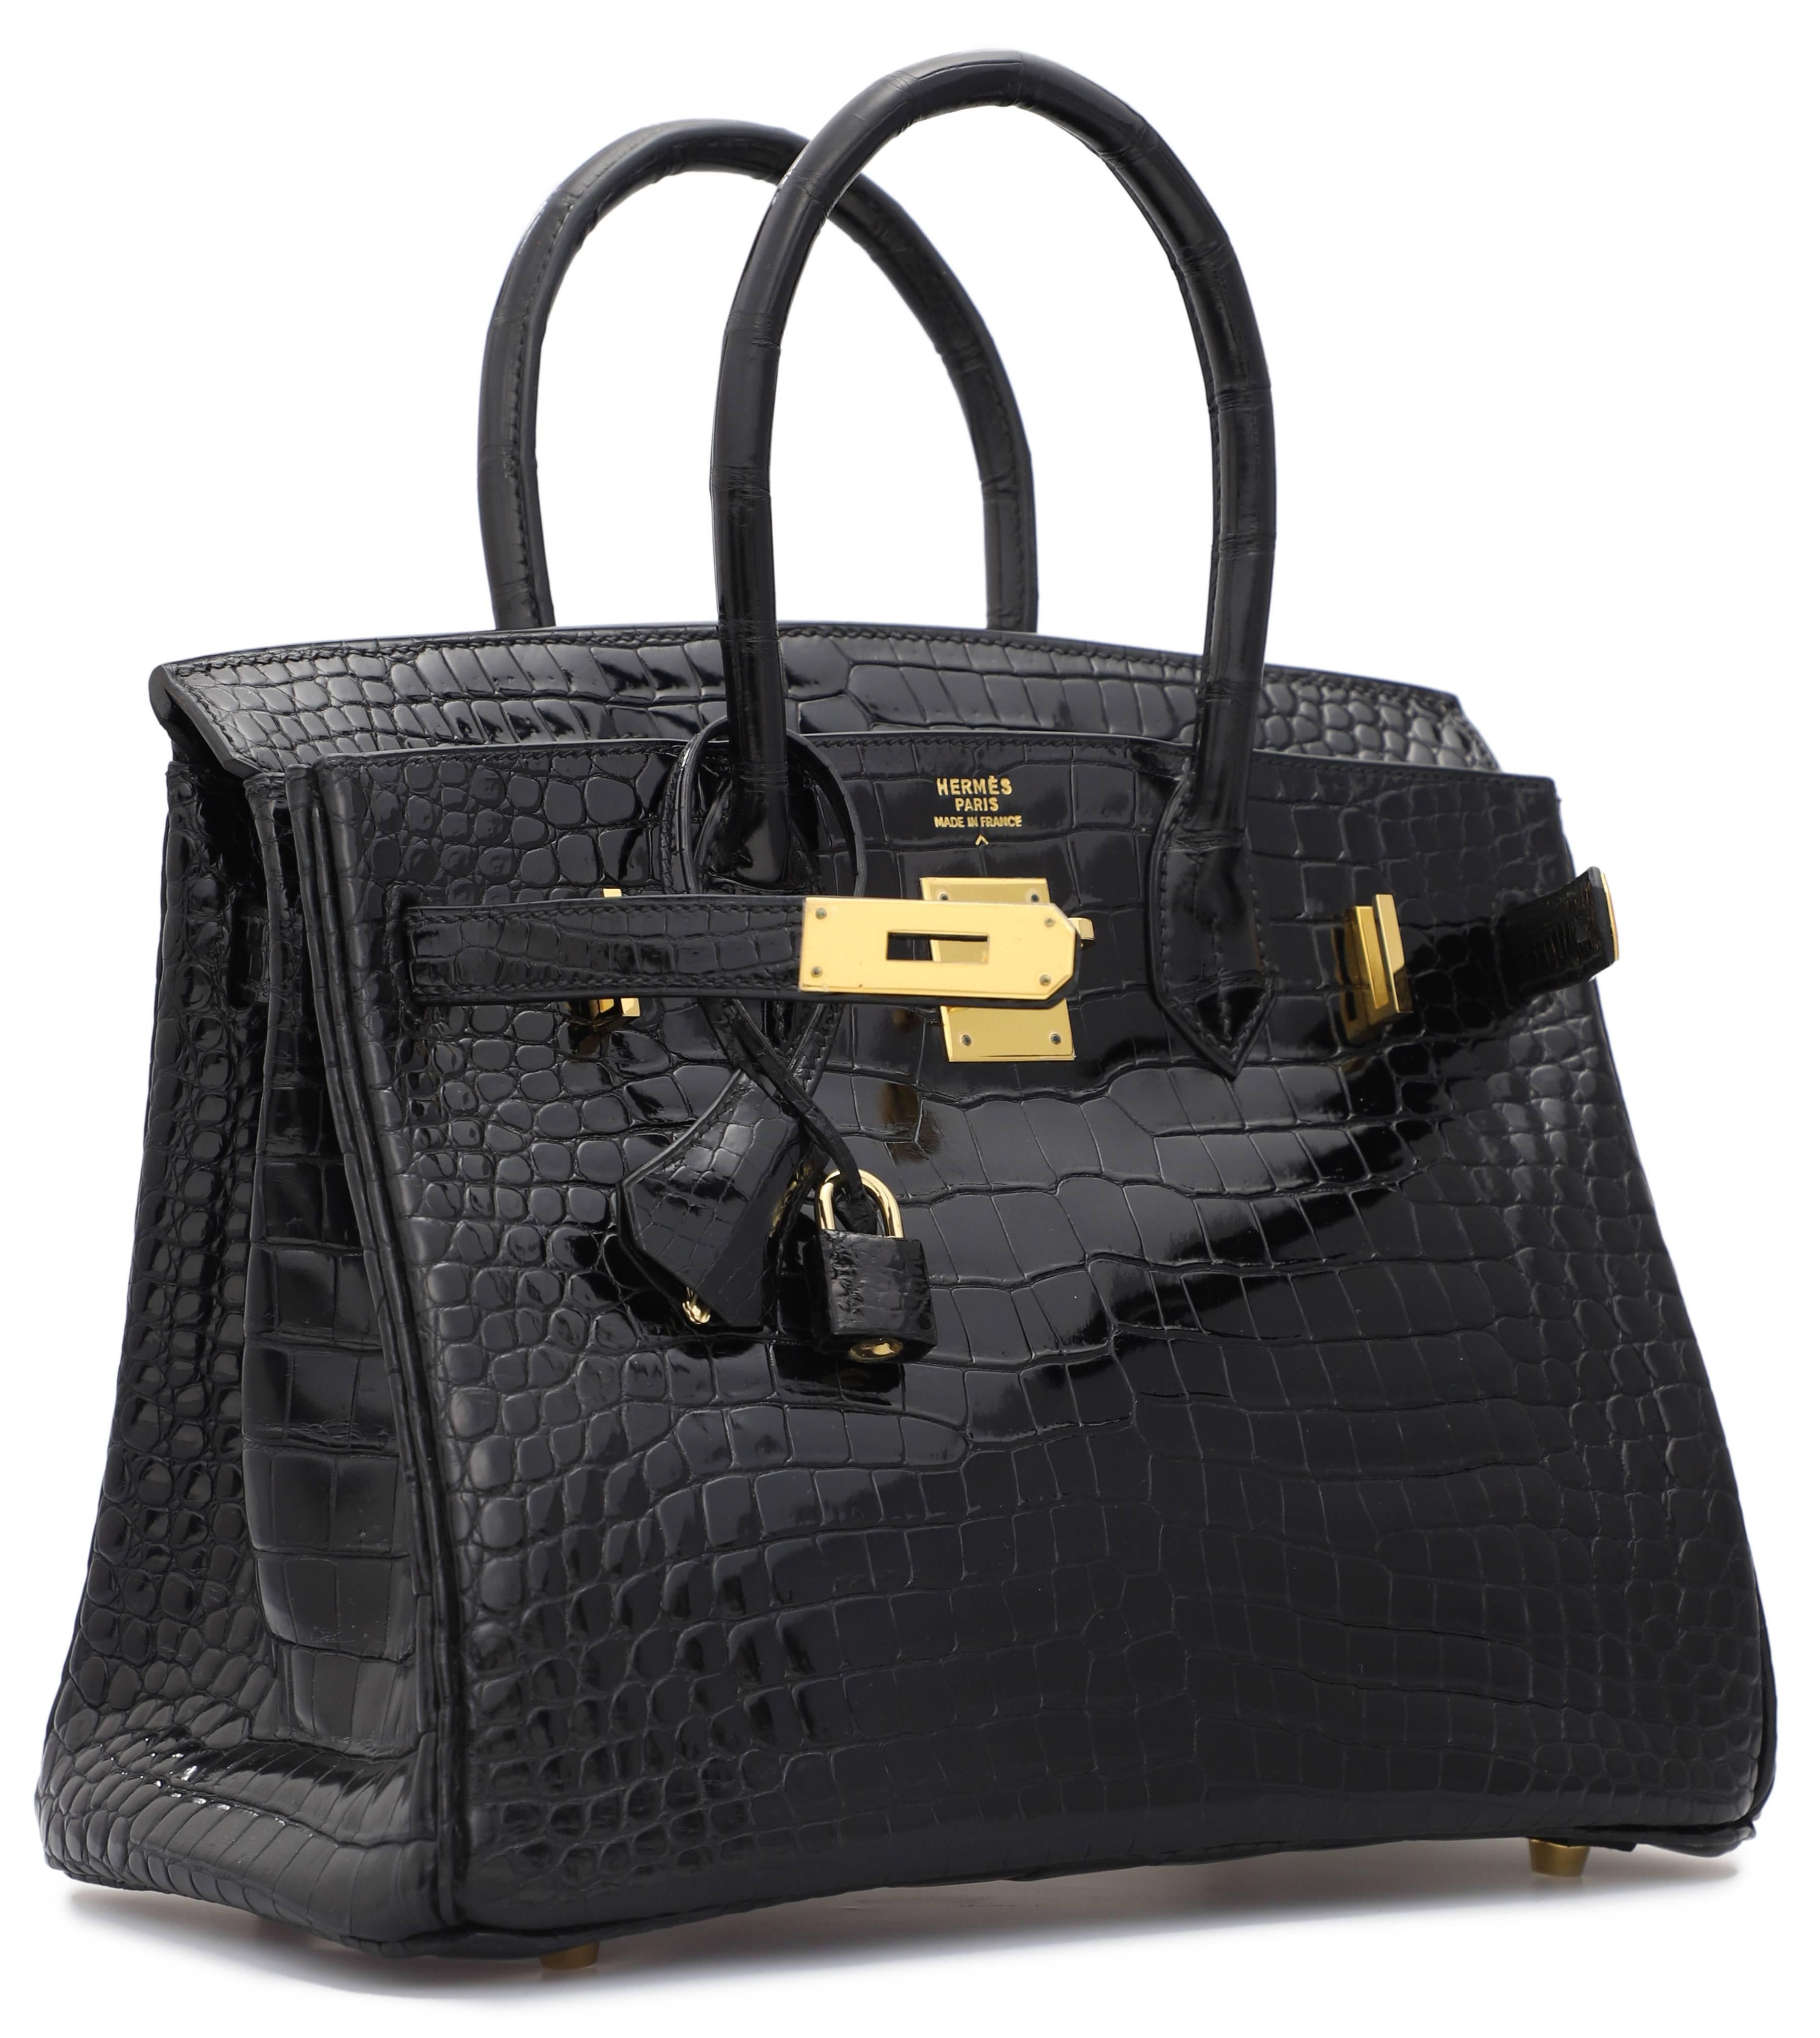 A Black Shiny Porosus Crocodile Birkin 30. Extraordinary Condition for this beautiful vintage piece, plastic protections still on front hardware. Stamp D in Square. Year 2000. Exhibits very light wear on the feet and on leather in the back. Includes